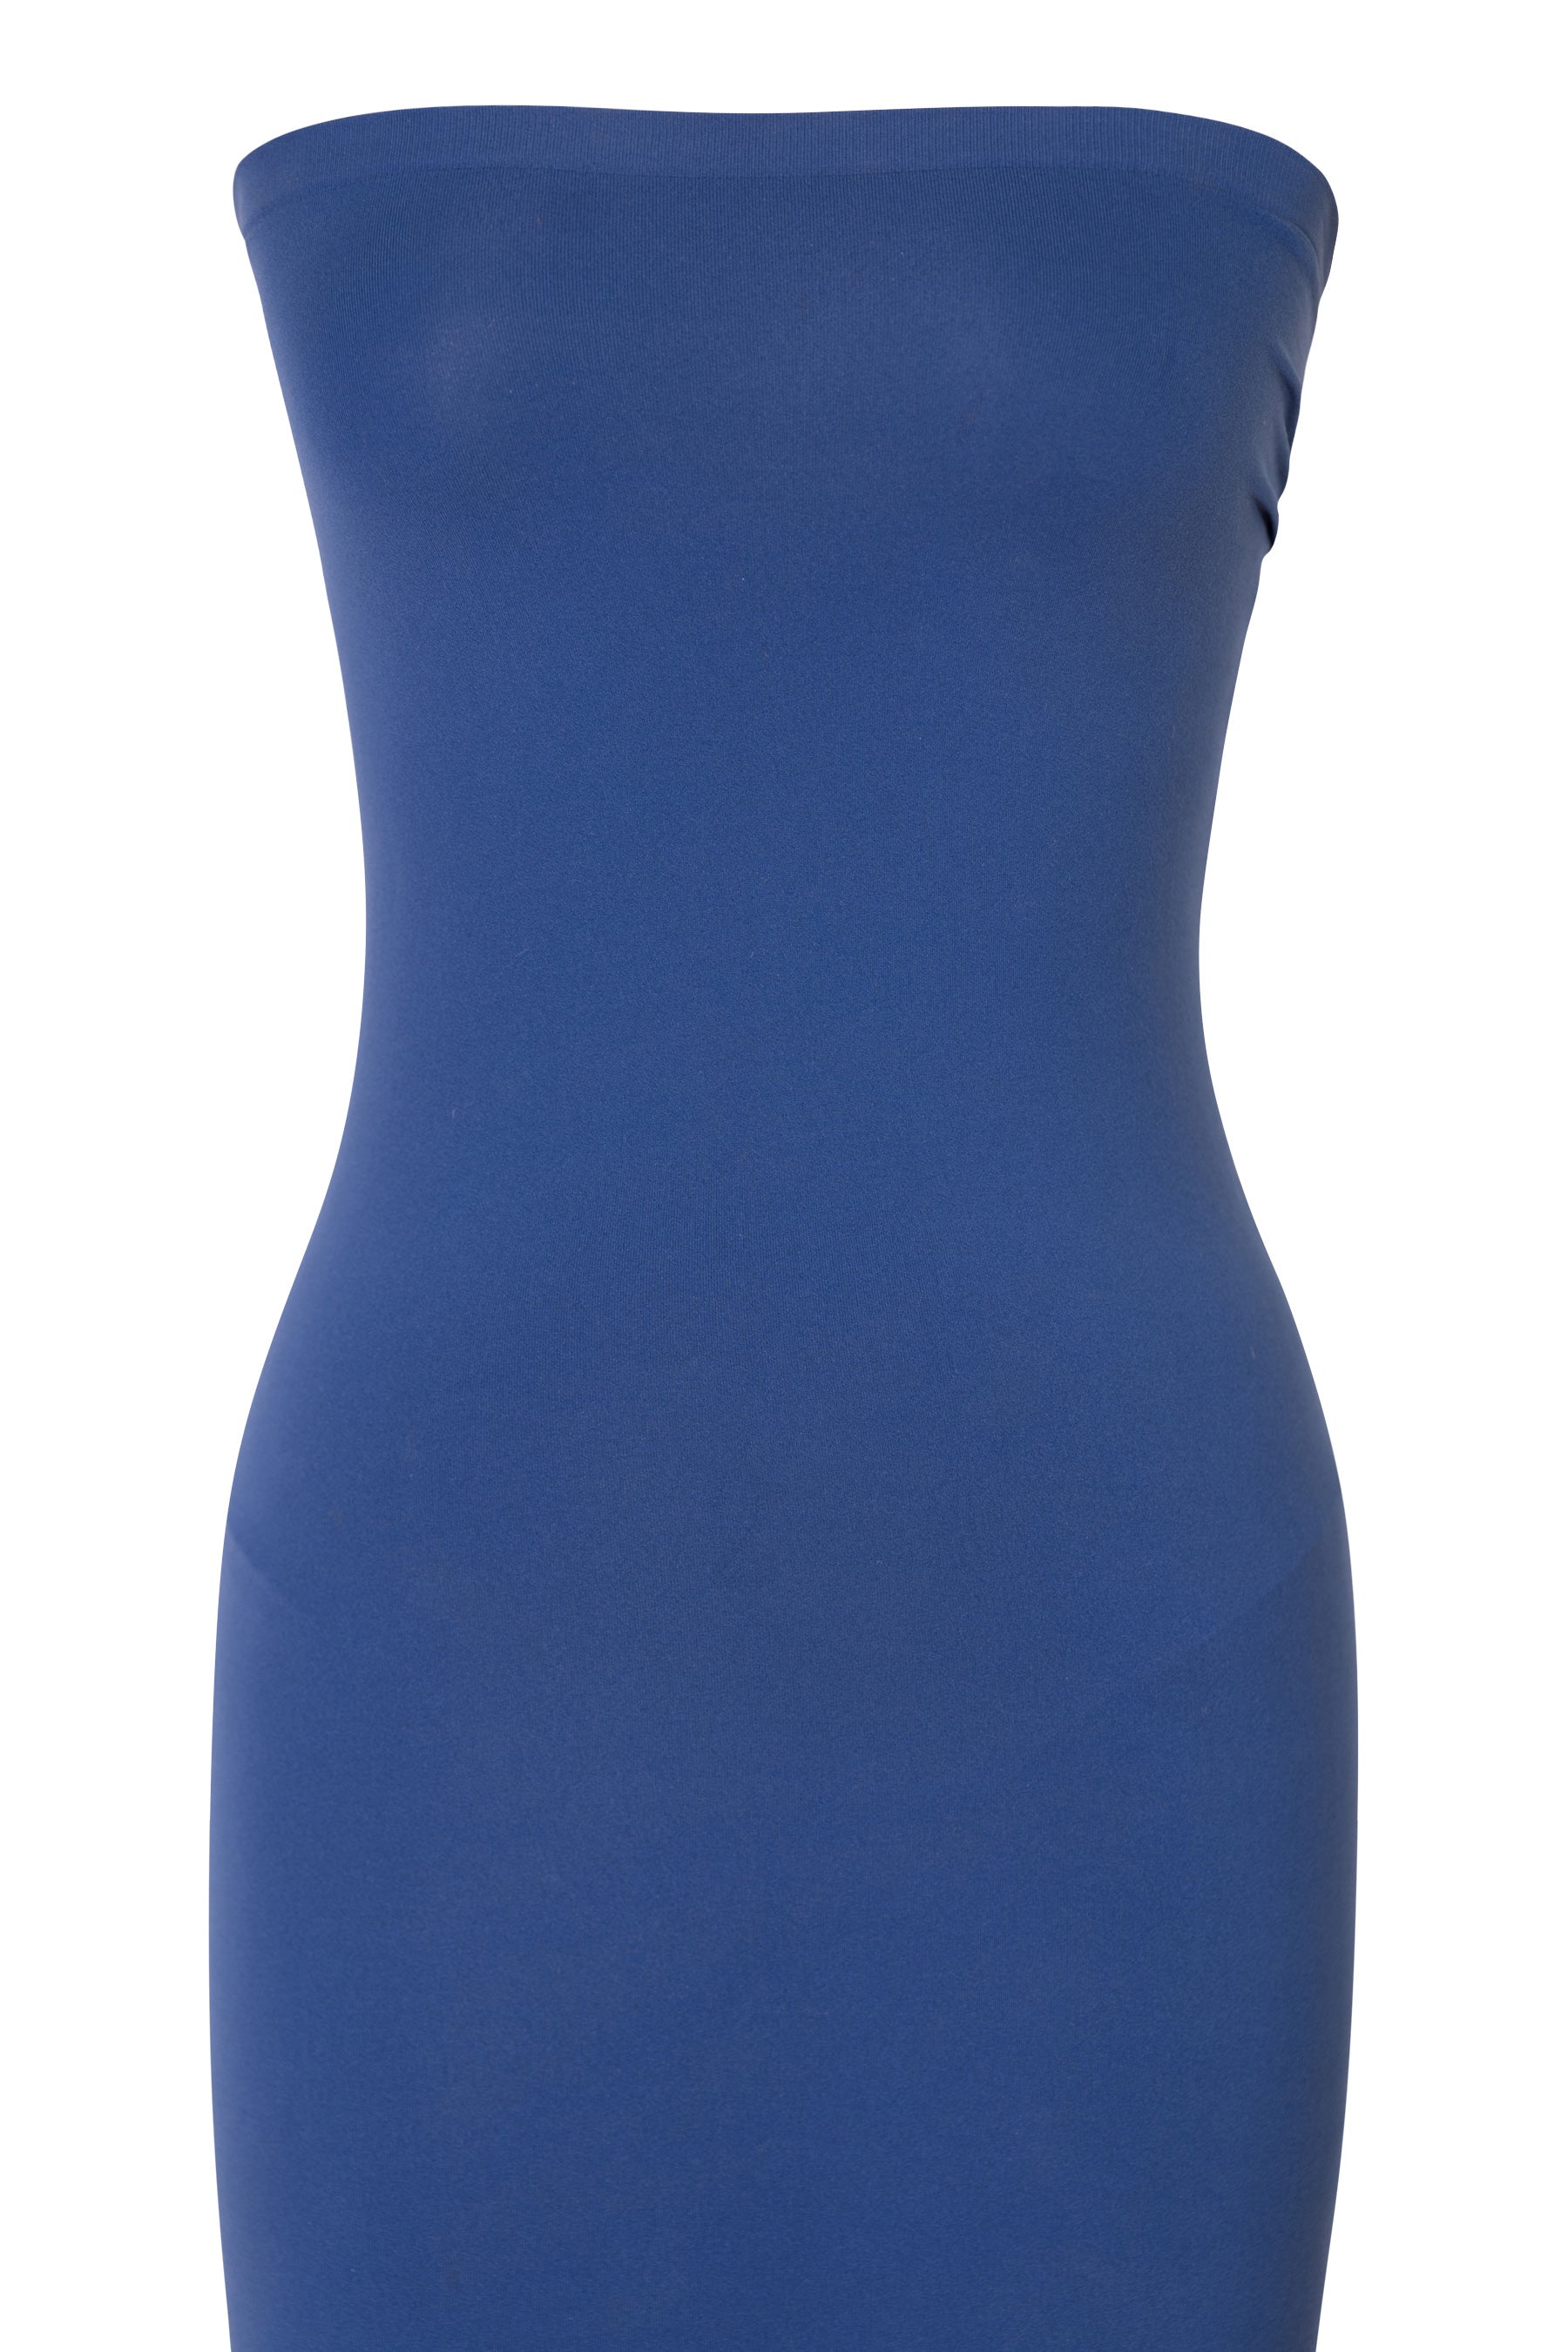 Wolford Fatal Dress in Blue